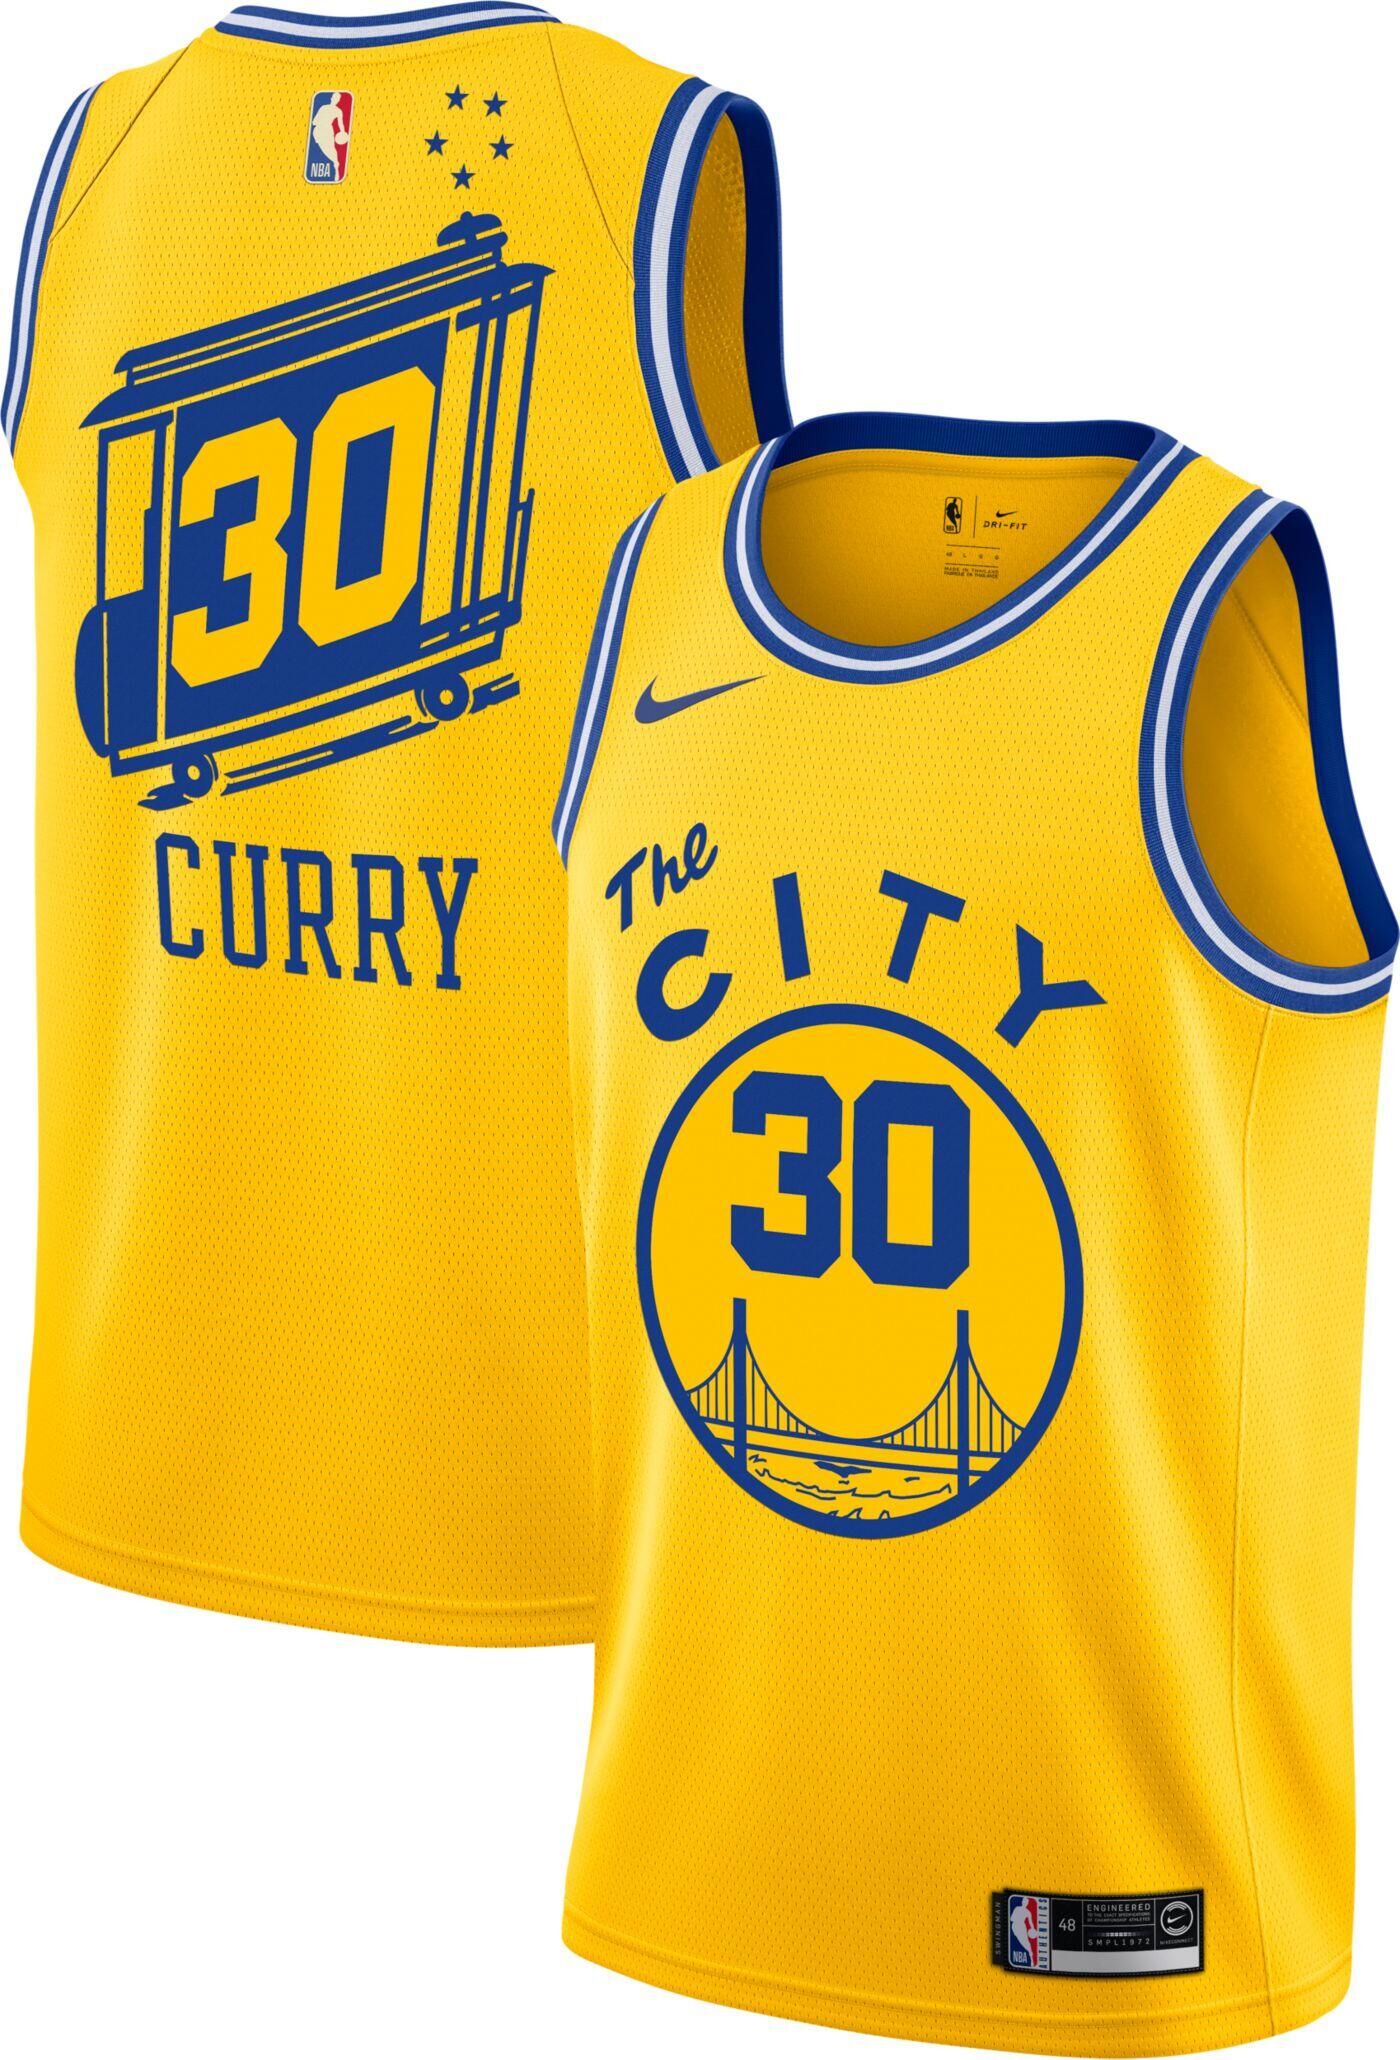 Men's Golden State Warriors #30 Stephen Curry Gold City Classic Edition Stitched NBA Jersey